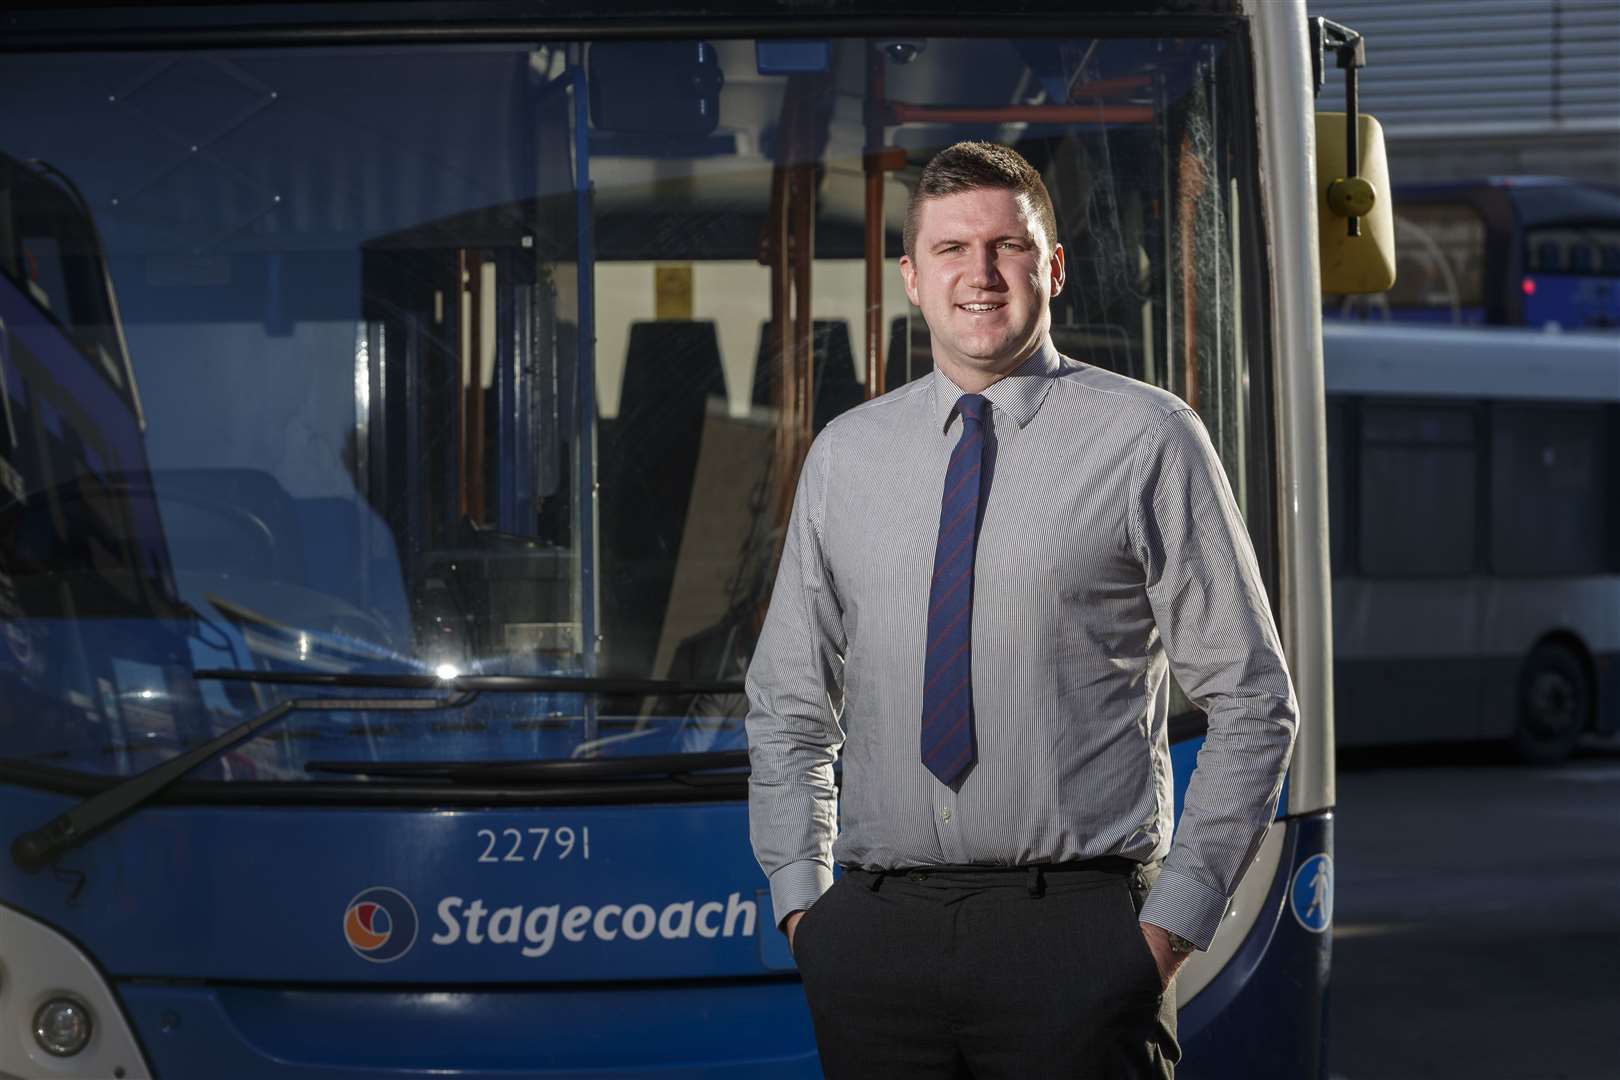 Managing director for Stagecoach Bluebird Peter Knight.